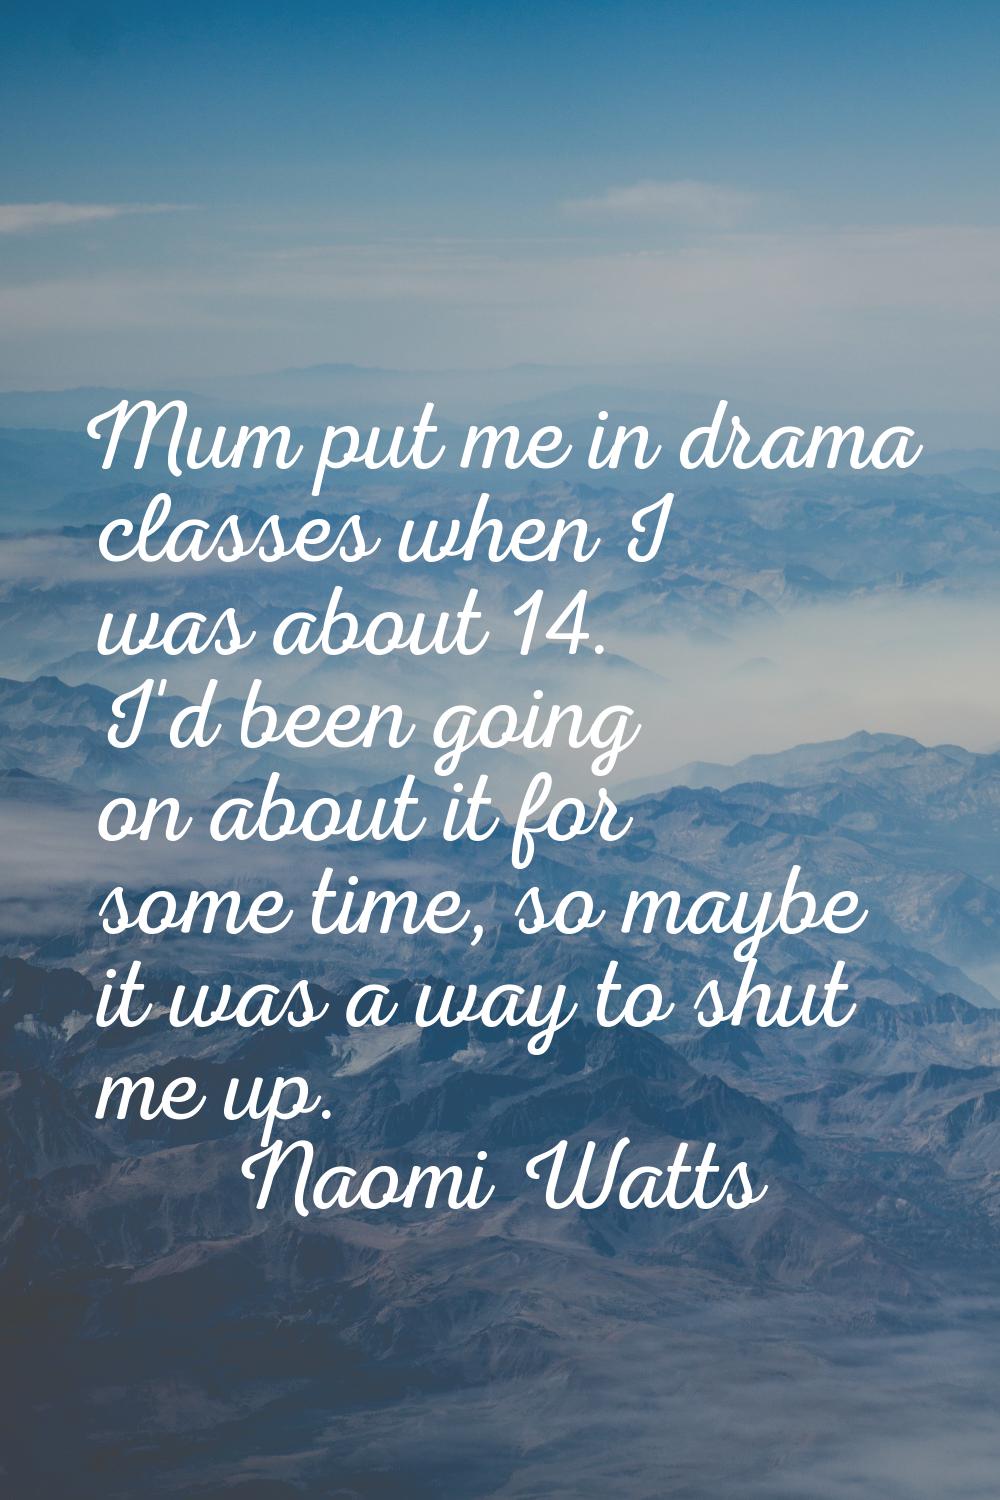 Mum put me in drama classes when I was about 14. I'd been going on about it for some time, so maybe